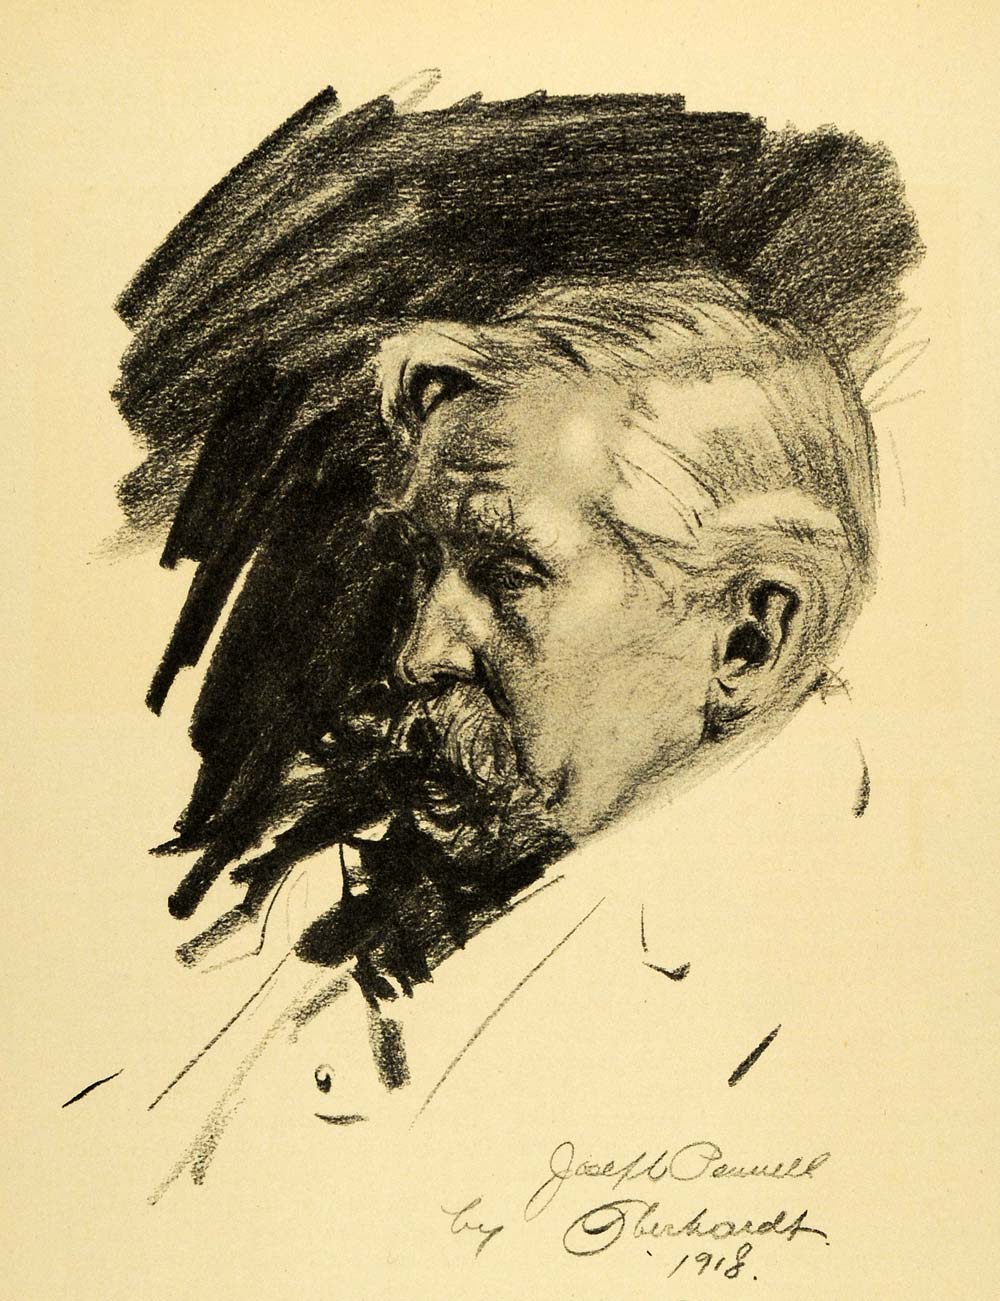 1925 Print Joseph Pennell William Oberhardt Portrait Drawing Charcoal XDA8